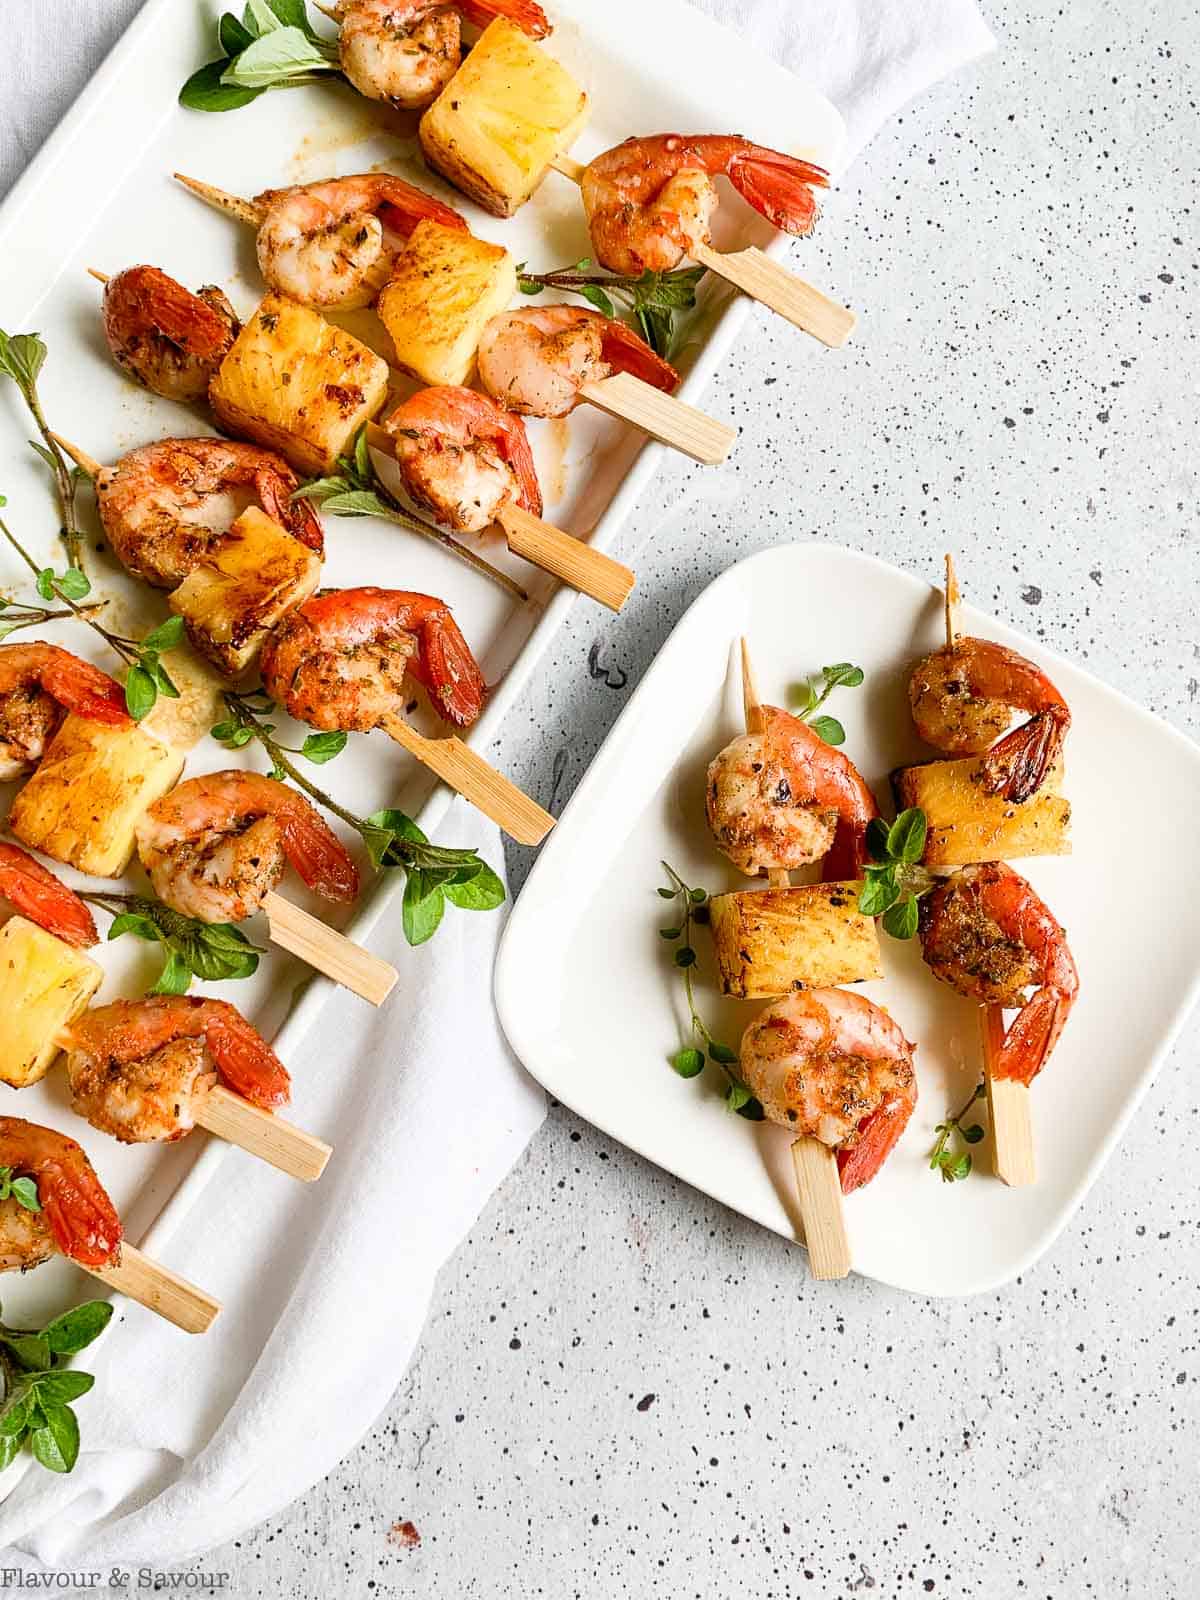 A platter of grilled shrimp or prawn kabobs with pineapple and a small plate with two skewers.